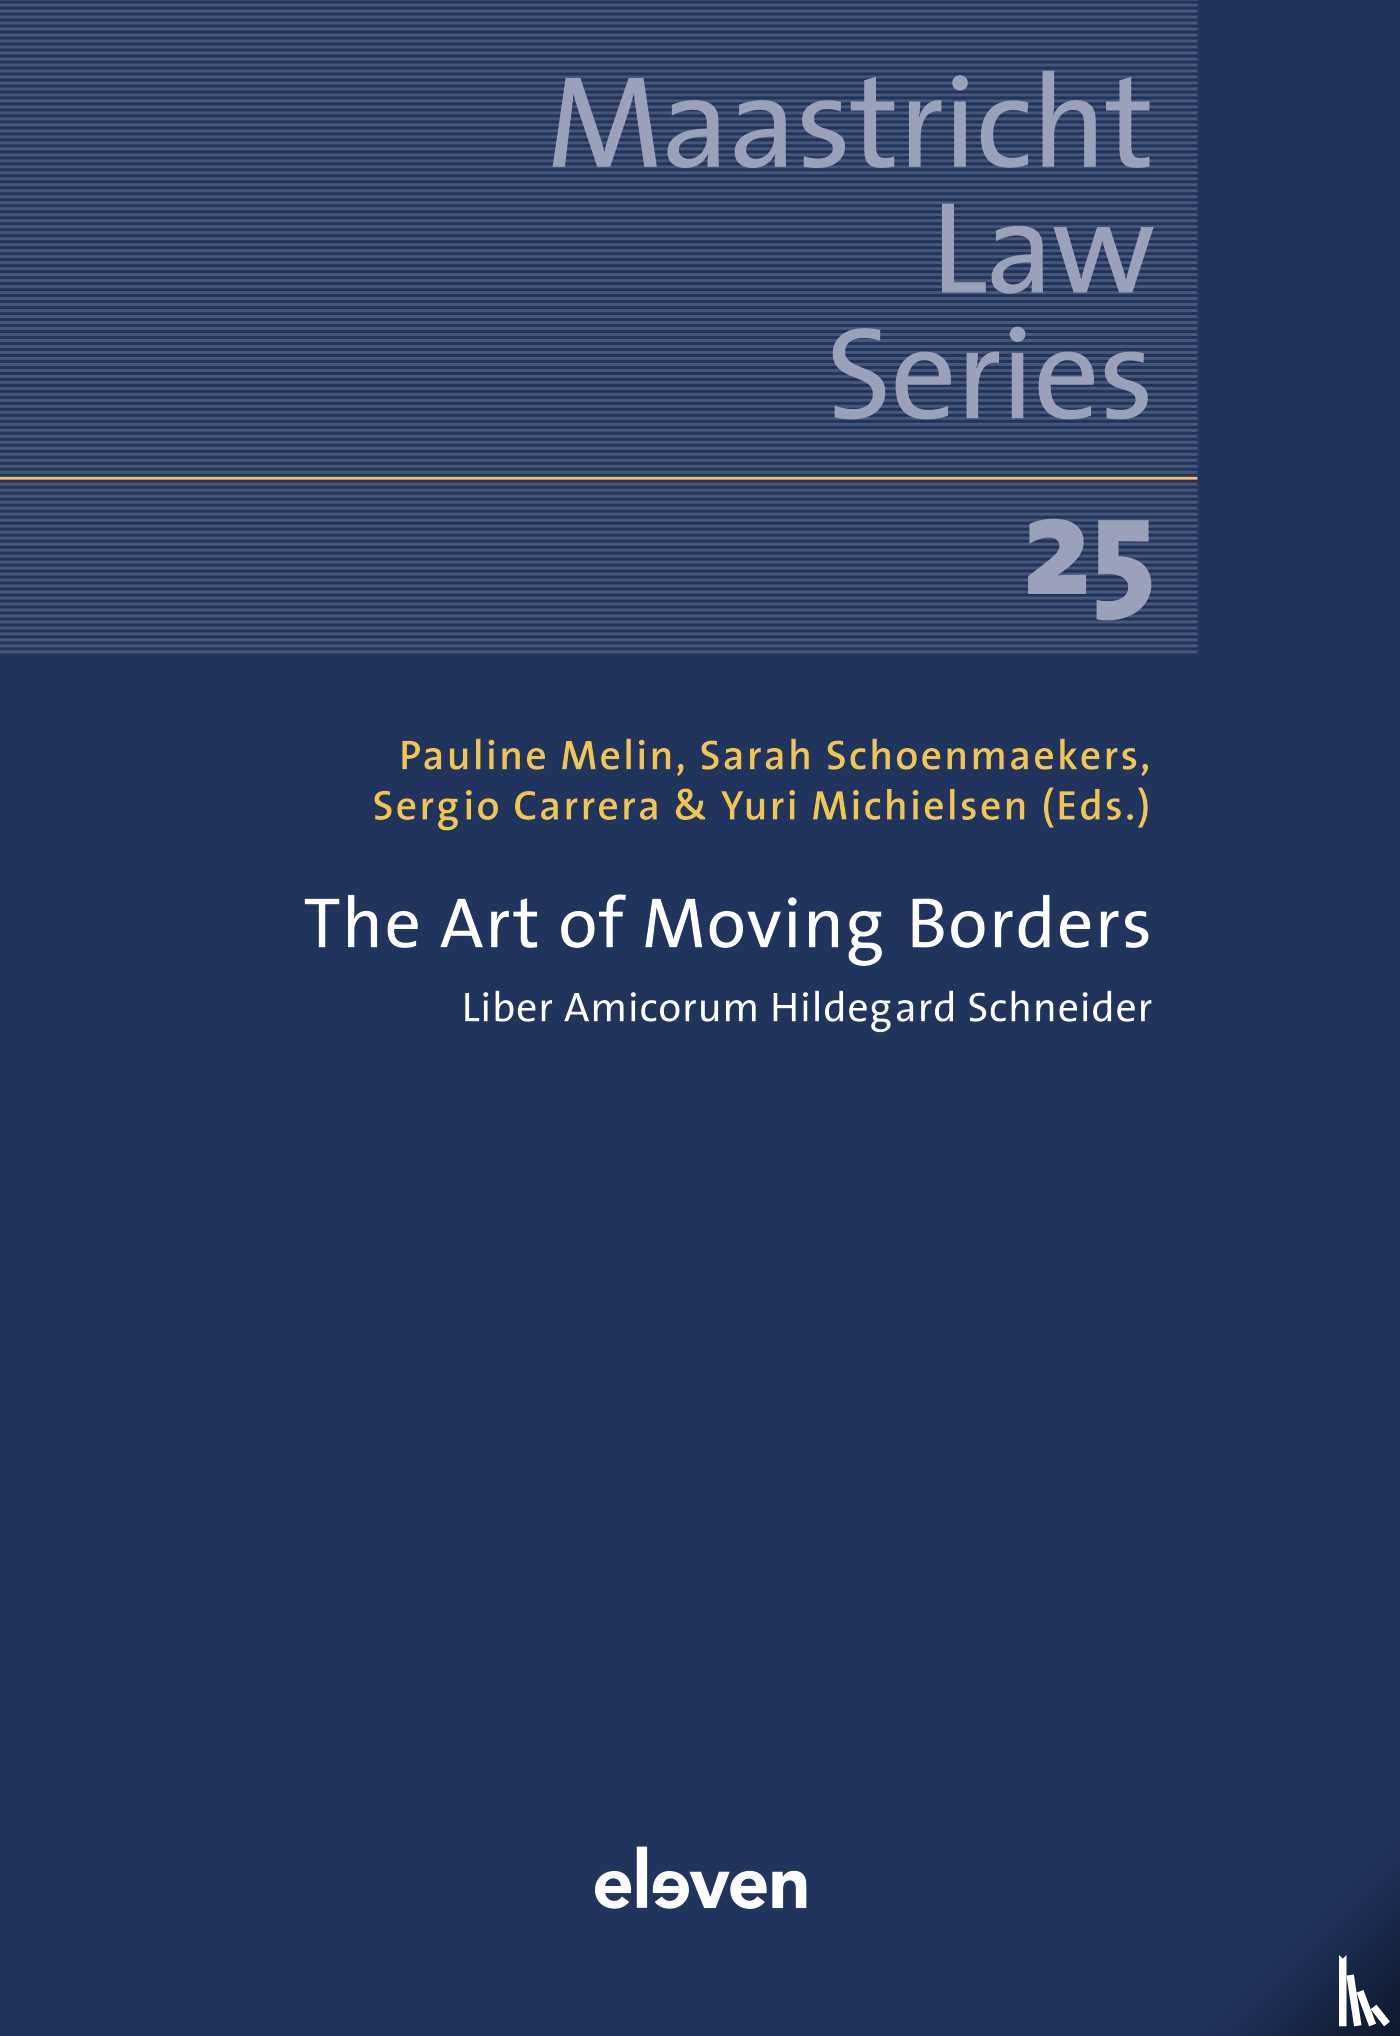  - The Art of Moving Borders